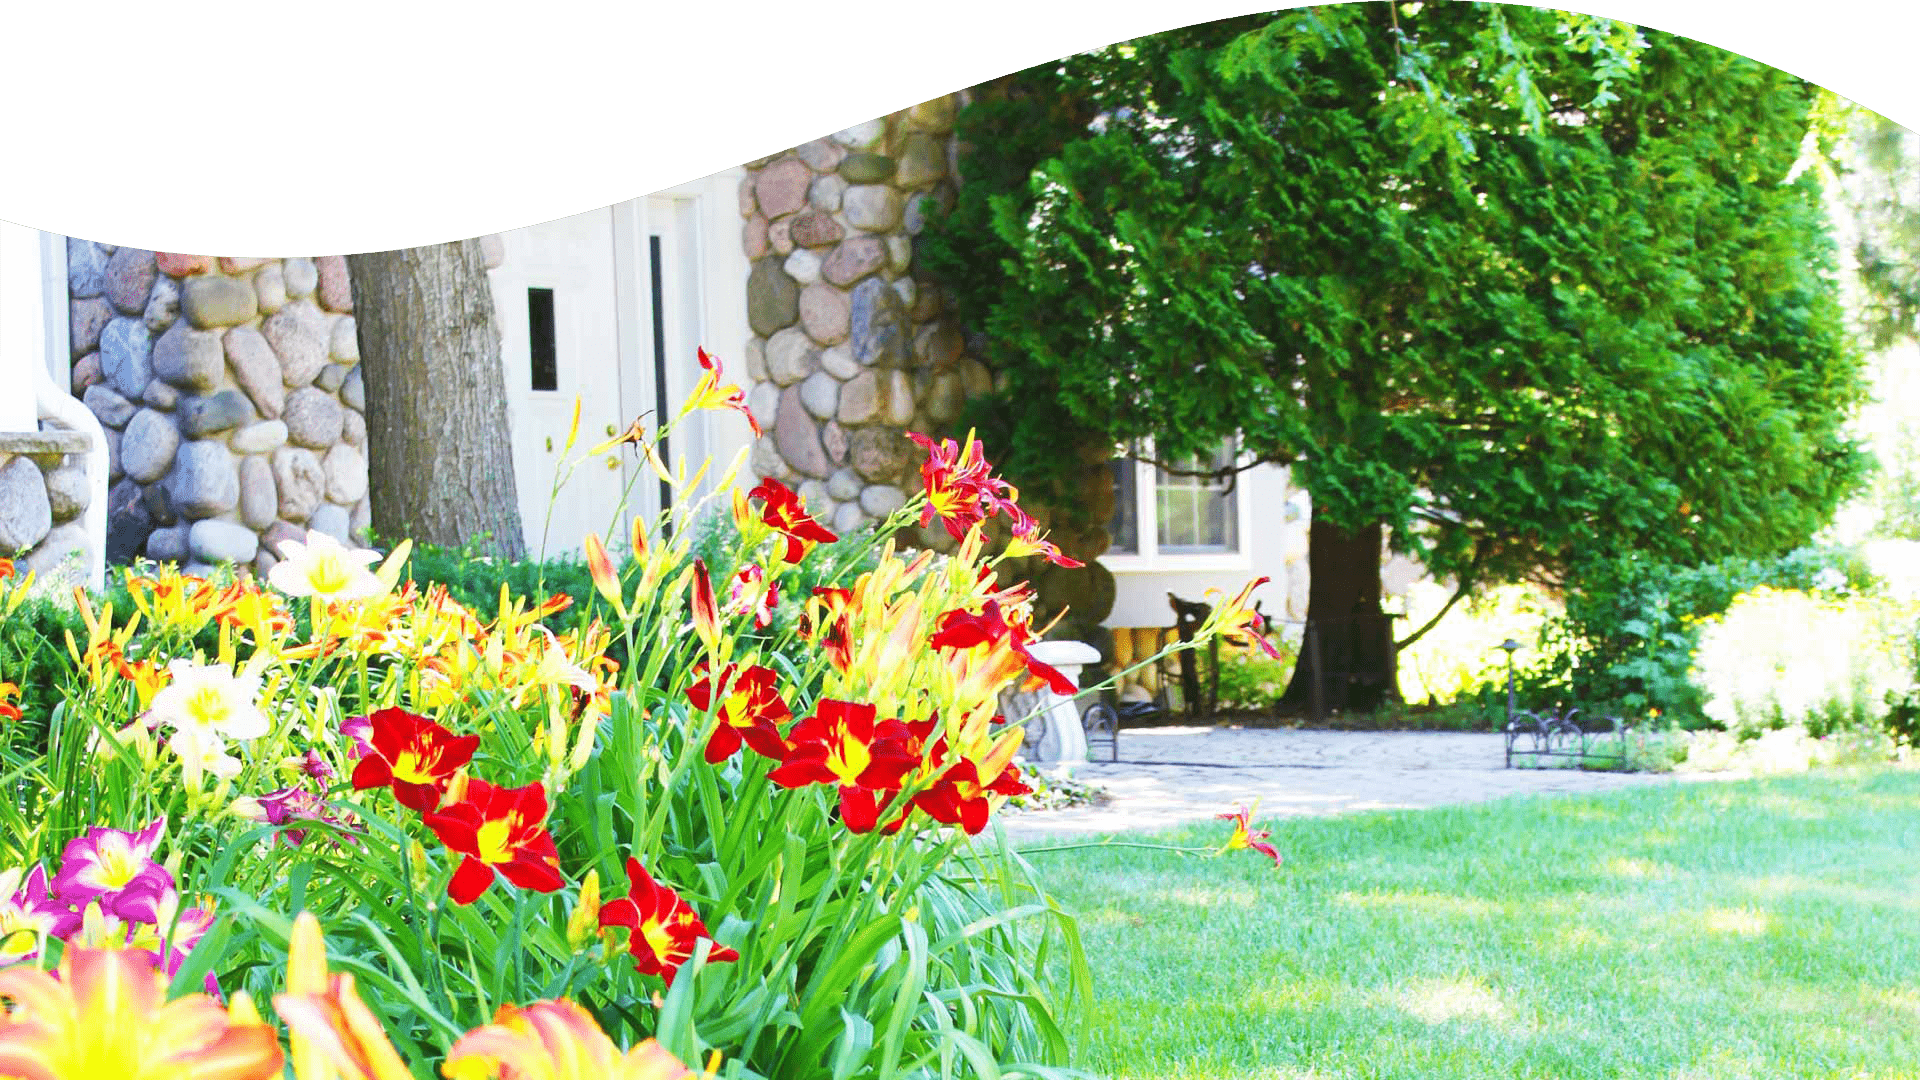 Lush garden with blooming daylilies in varied colors, stone house facade, green trees, and a manicured lawn with a curving walkway and benches.